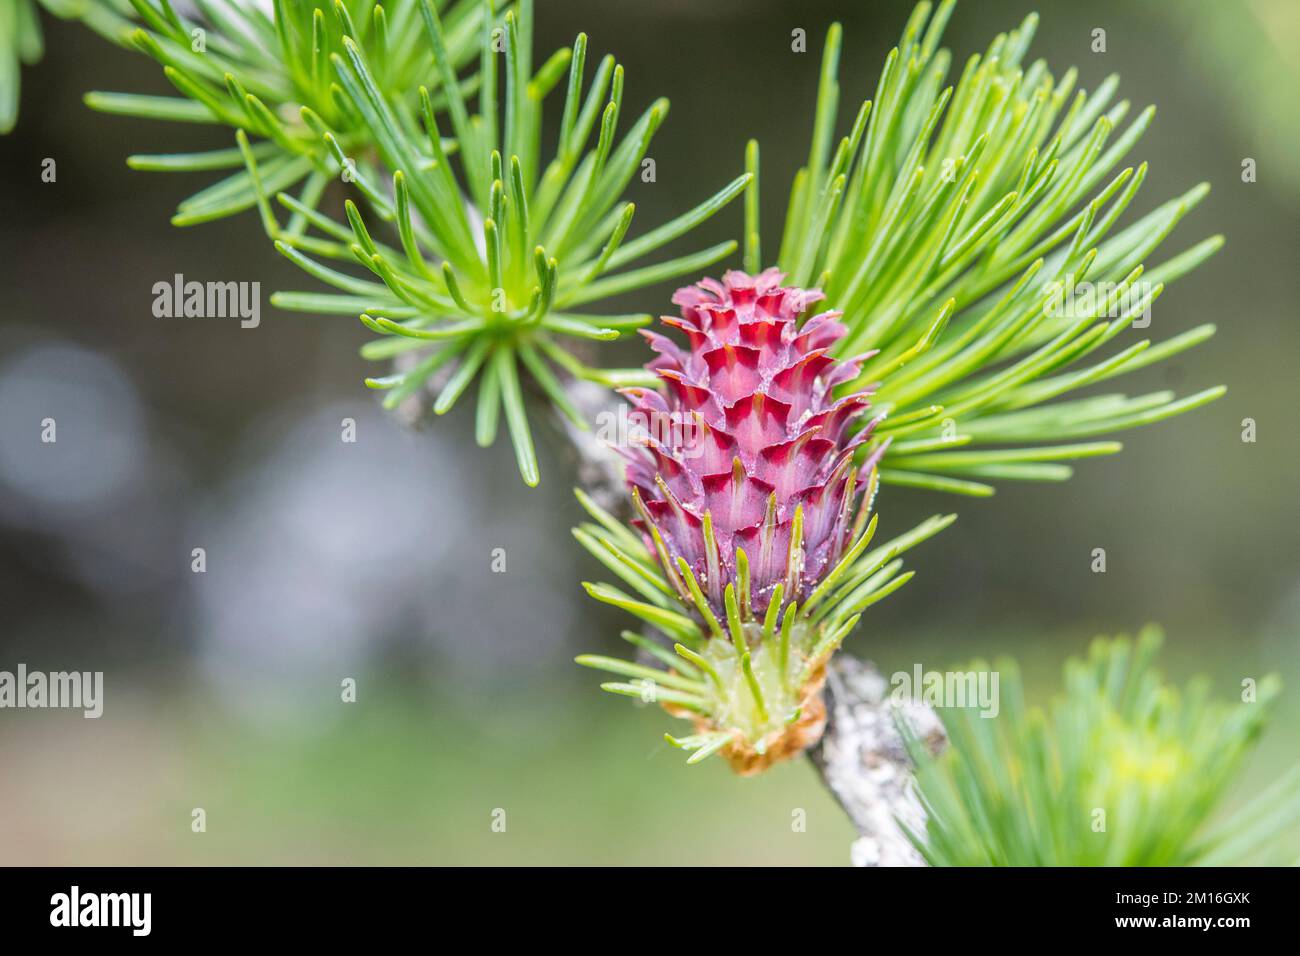 Larix decidua, the European larch, is a species of larch native to the mountains of central Europe, female, flower. Stock Photo